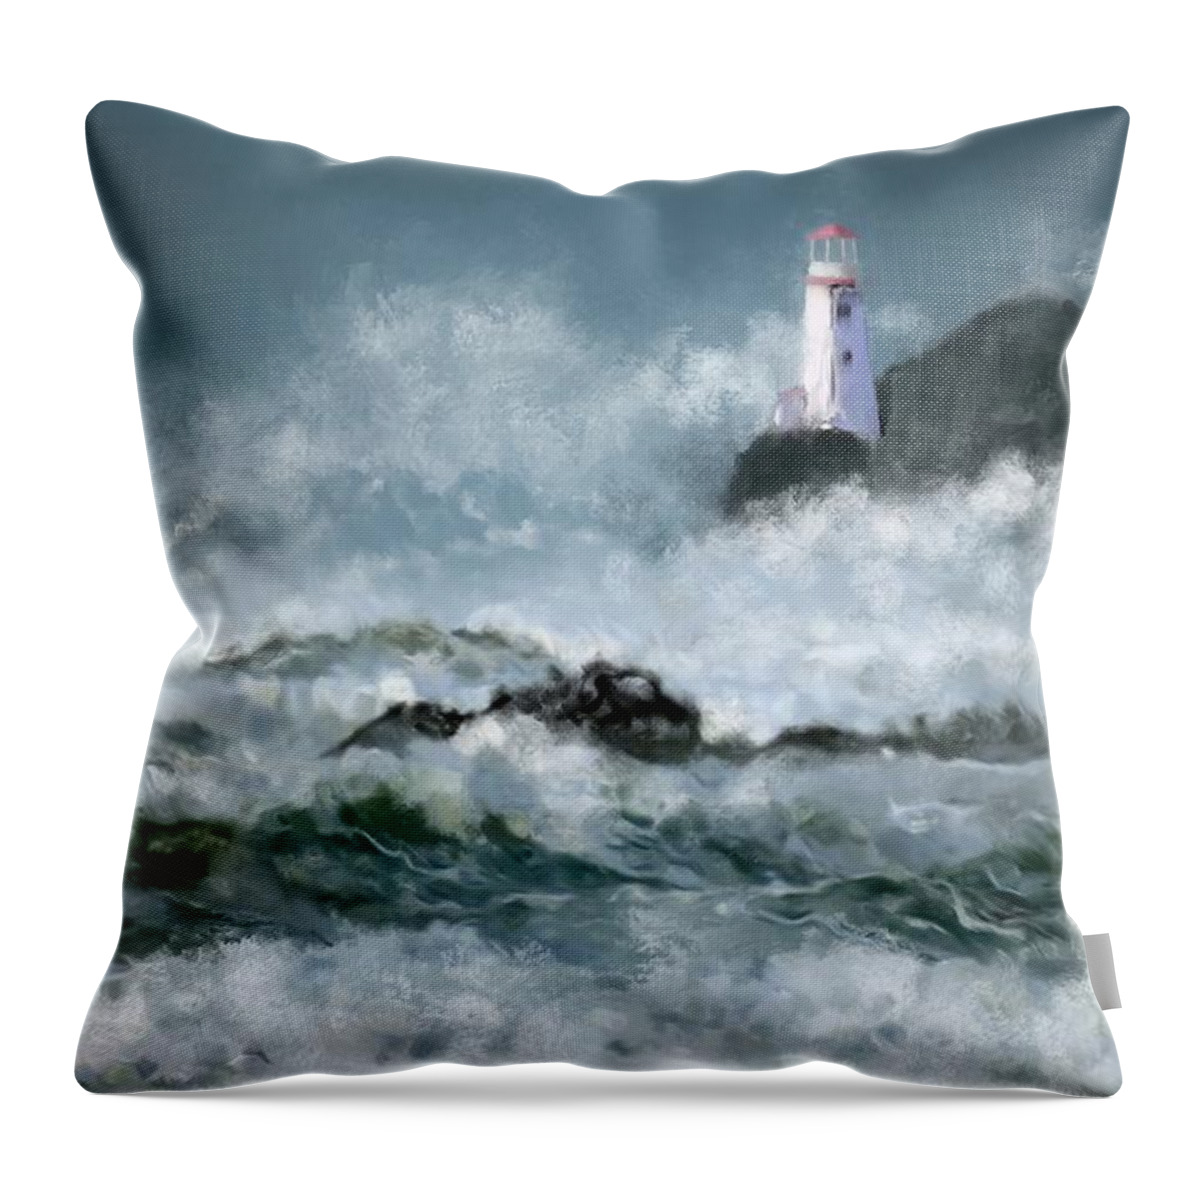 Waves Throw Pillow featuring the digital art Stormy Seas by Michael Malicoat